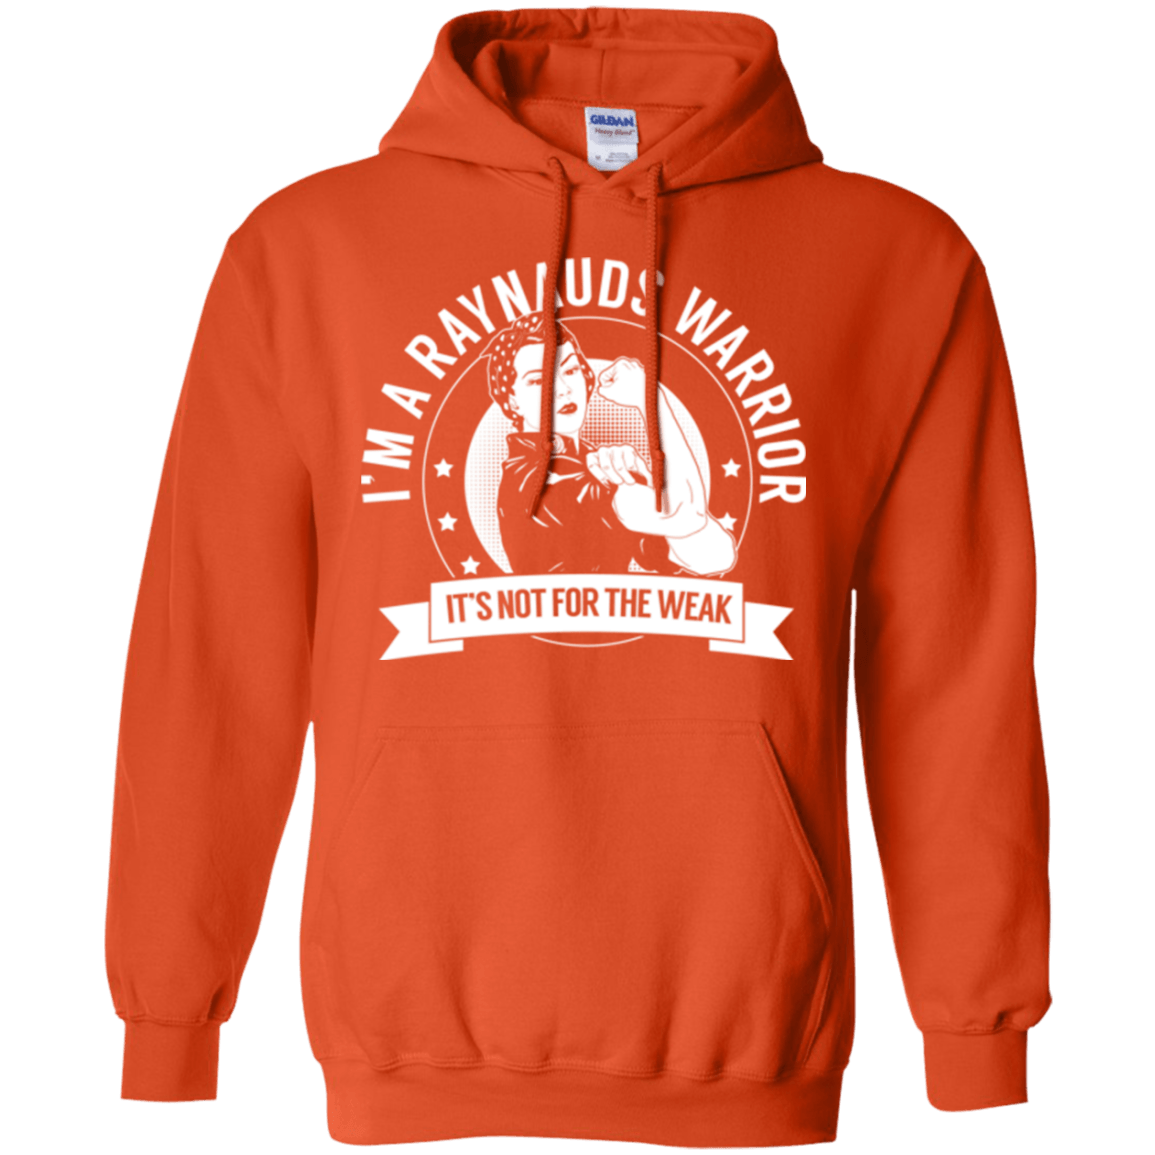 Raynaud's Disease - Raynauds Warrior Not For The Weak Pullover Hoodie 8 oz. - The Unchargeables